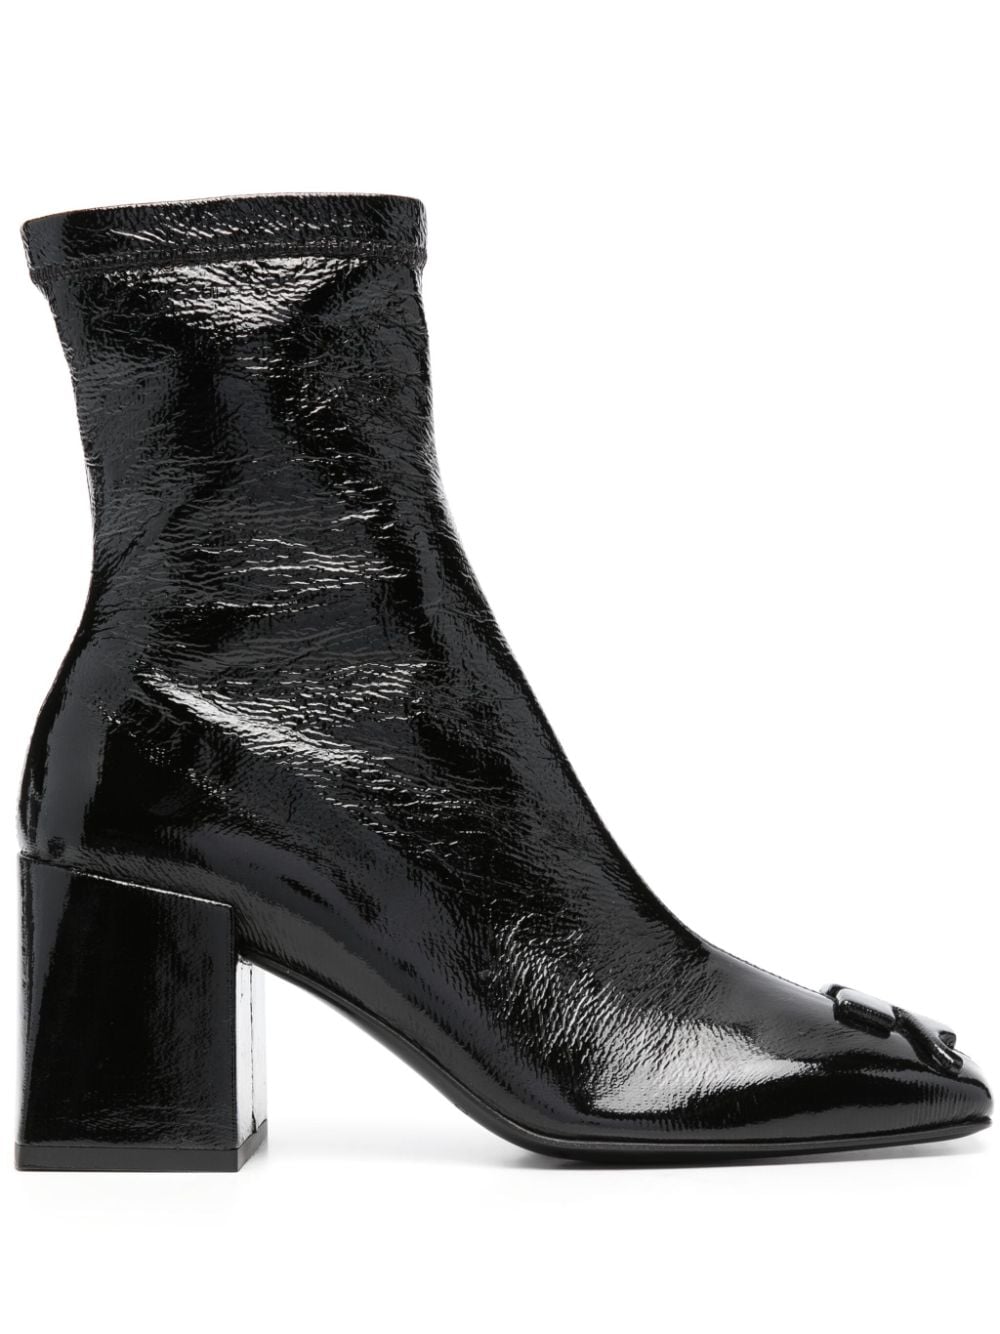 COURRÈGES HERITAGE 90MM ANKLE BOOTS